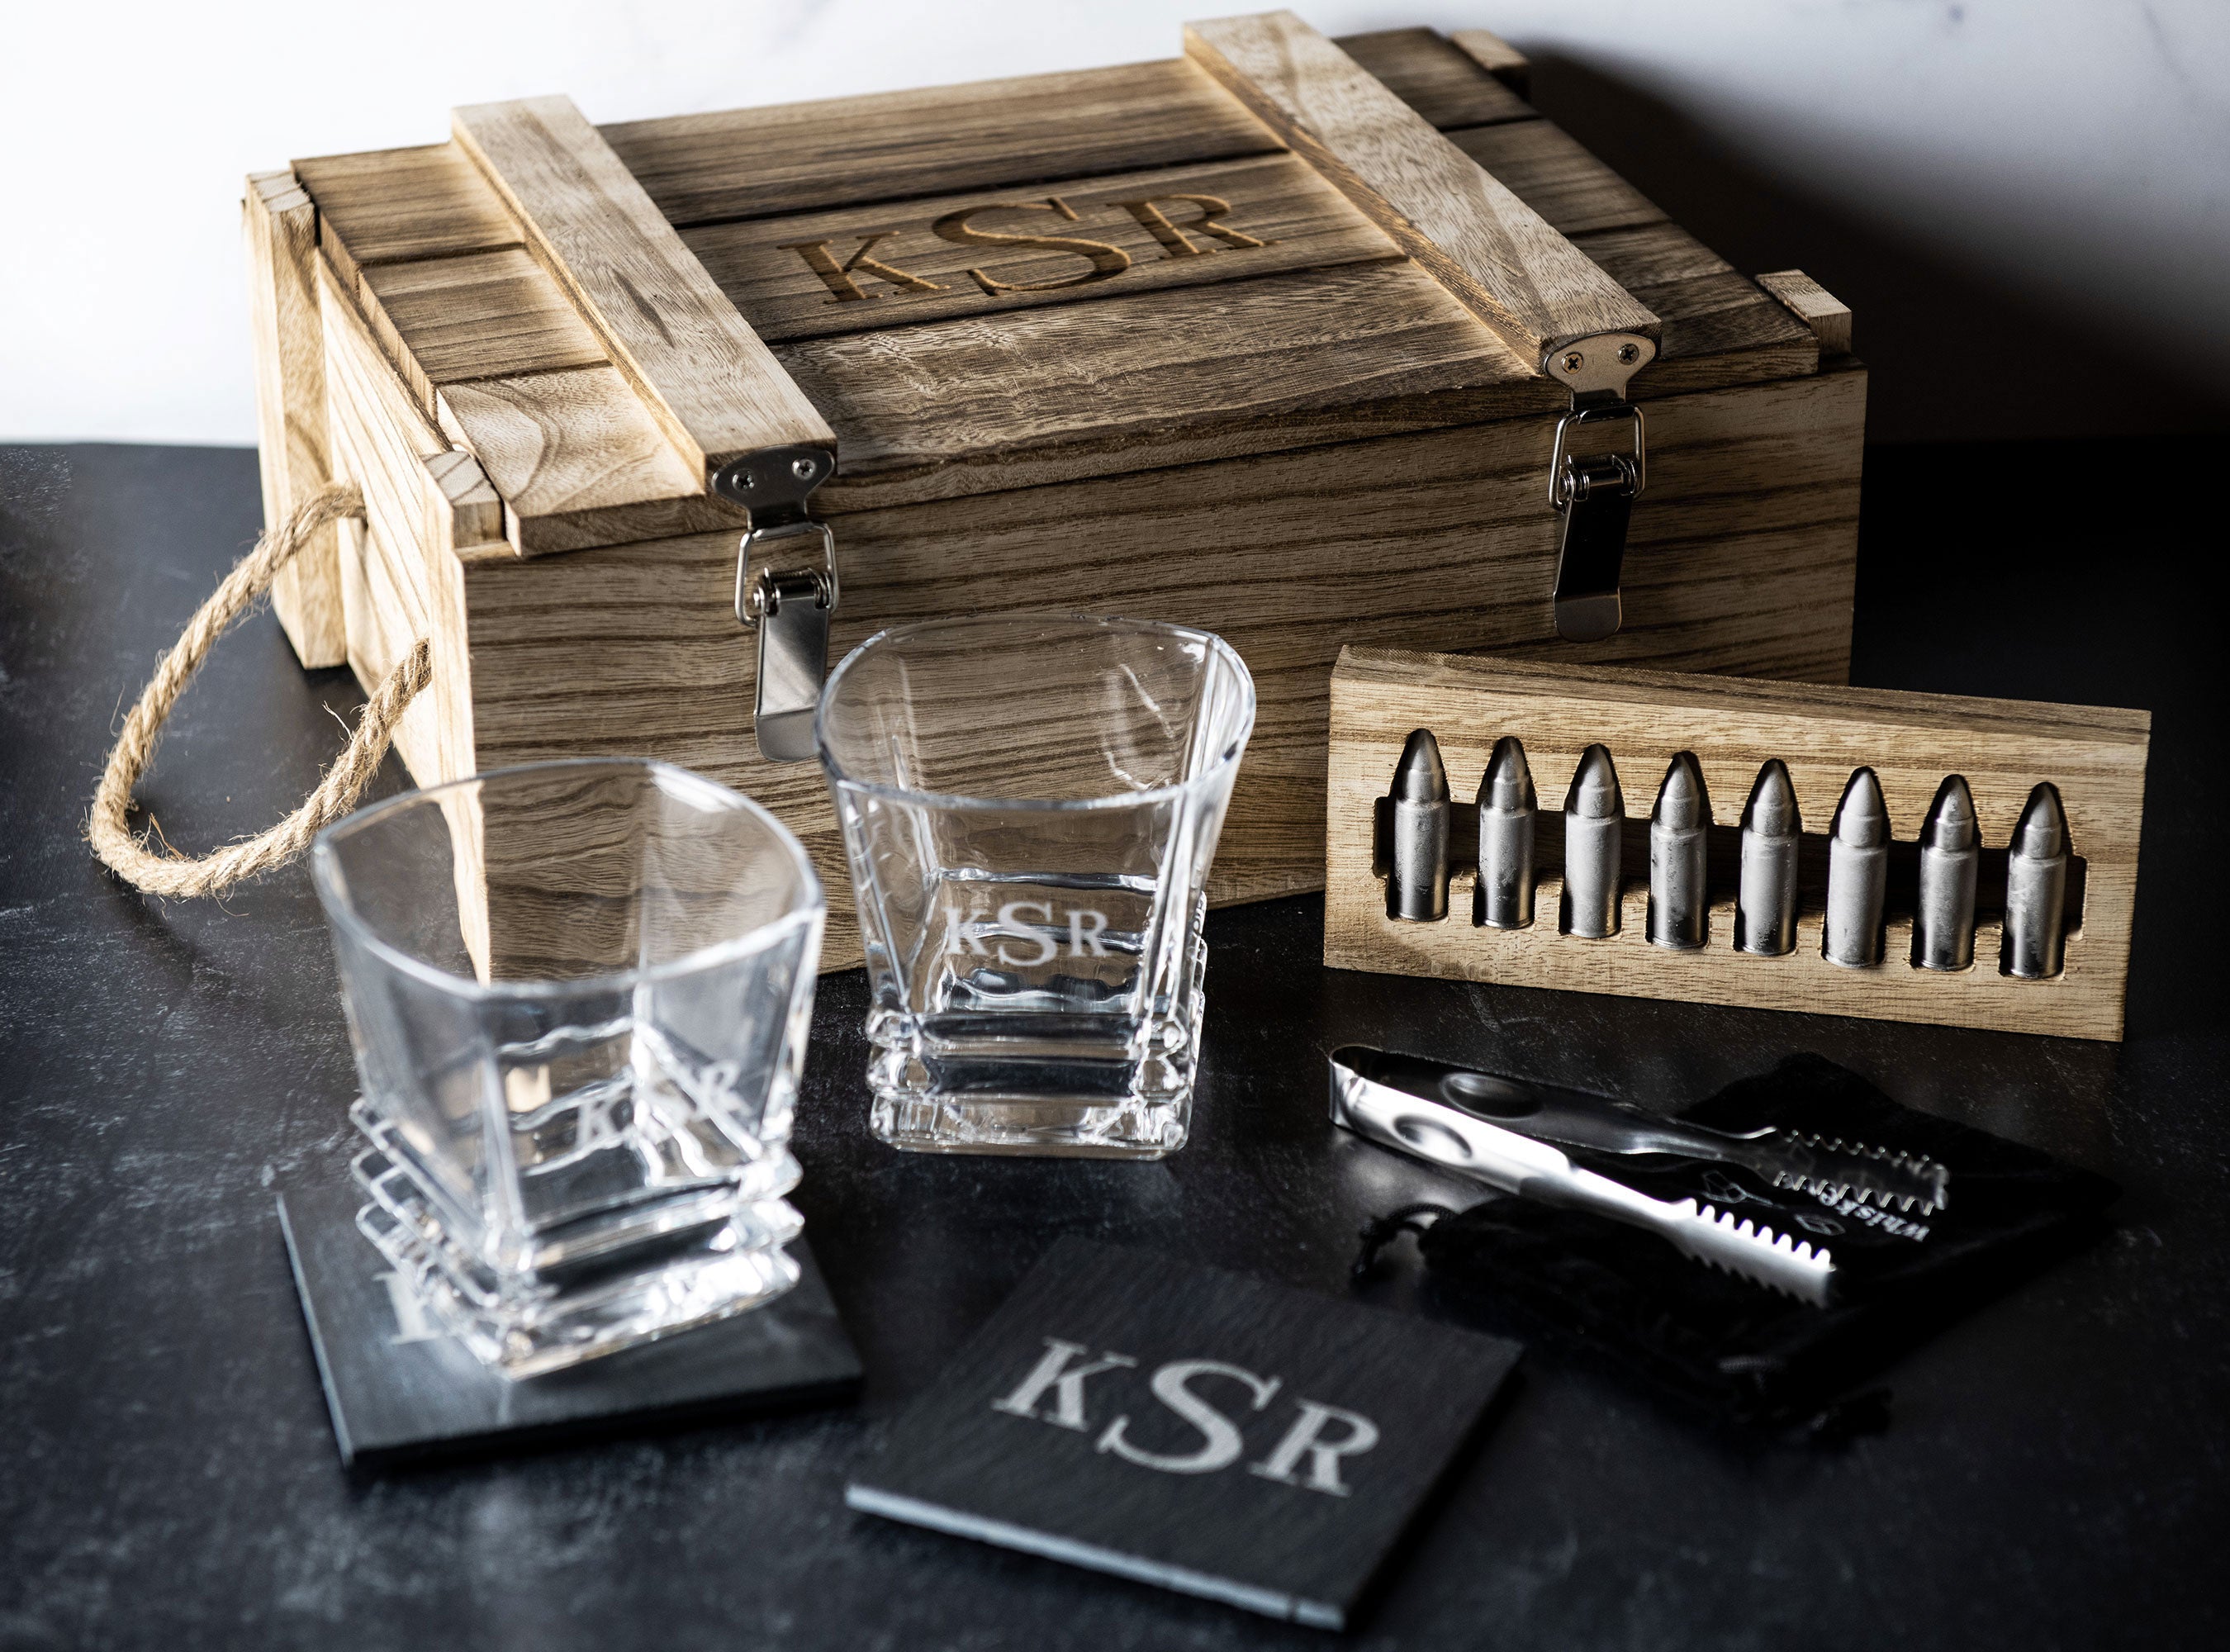 Engraved Corporate Wooden Gift Boxed Scotch Glass and Whiskey Stone Set